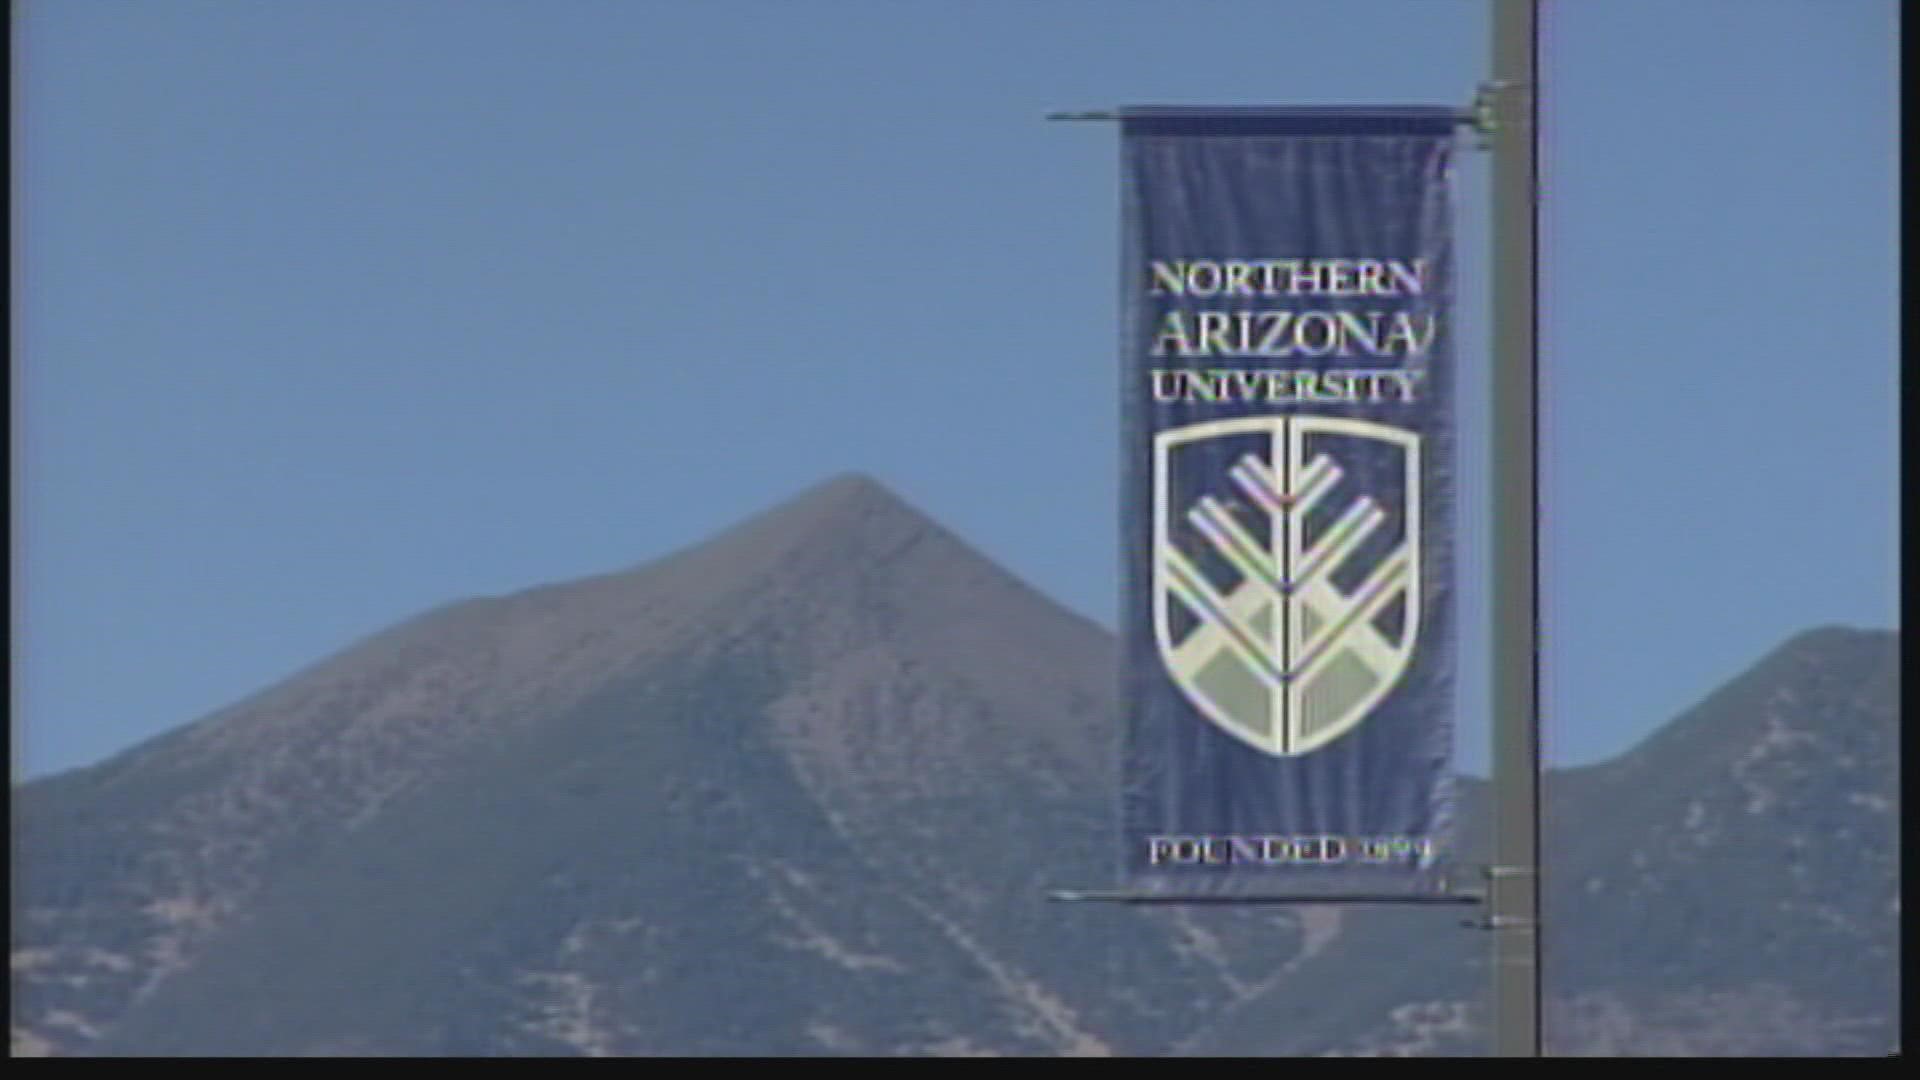 NAU plans to offer free tuition to Arizona residents who come from households with annual incomes under $65,000. The program is called "Access 2 Excellence."